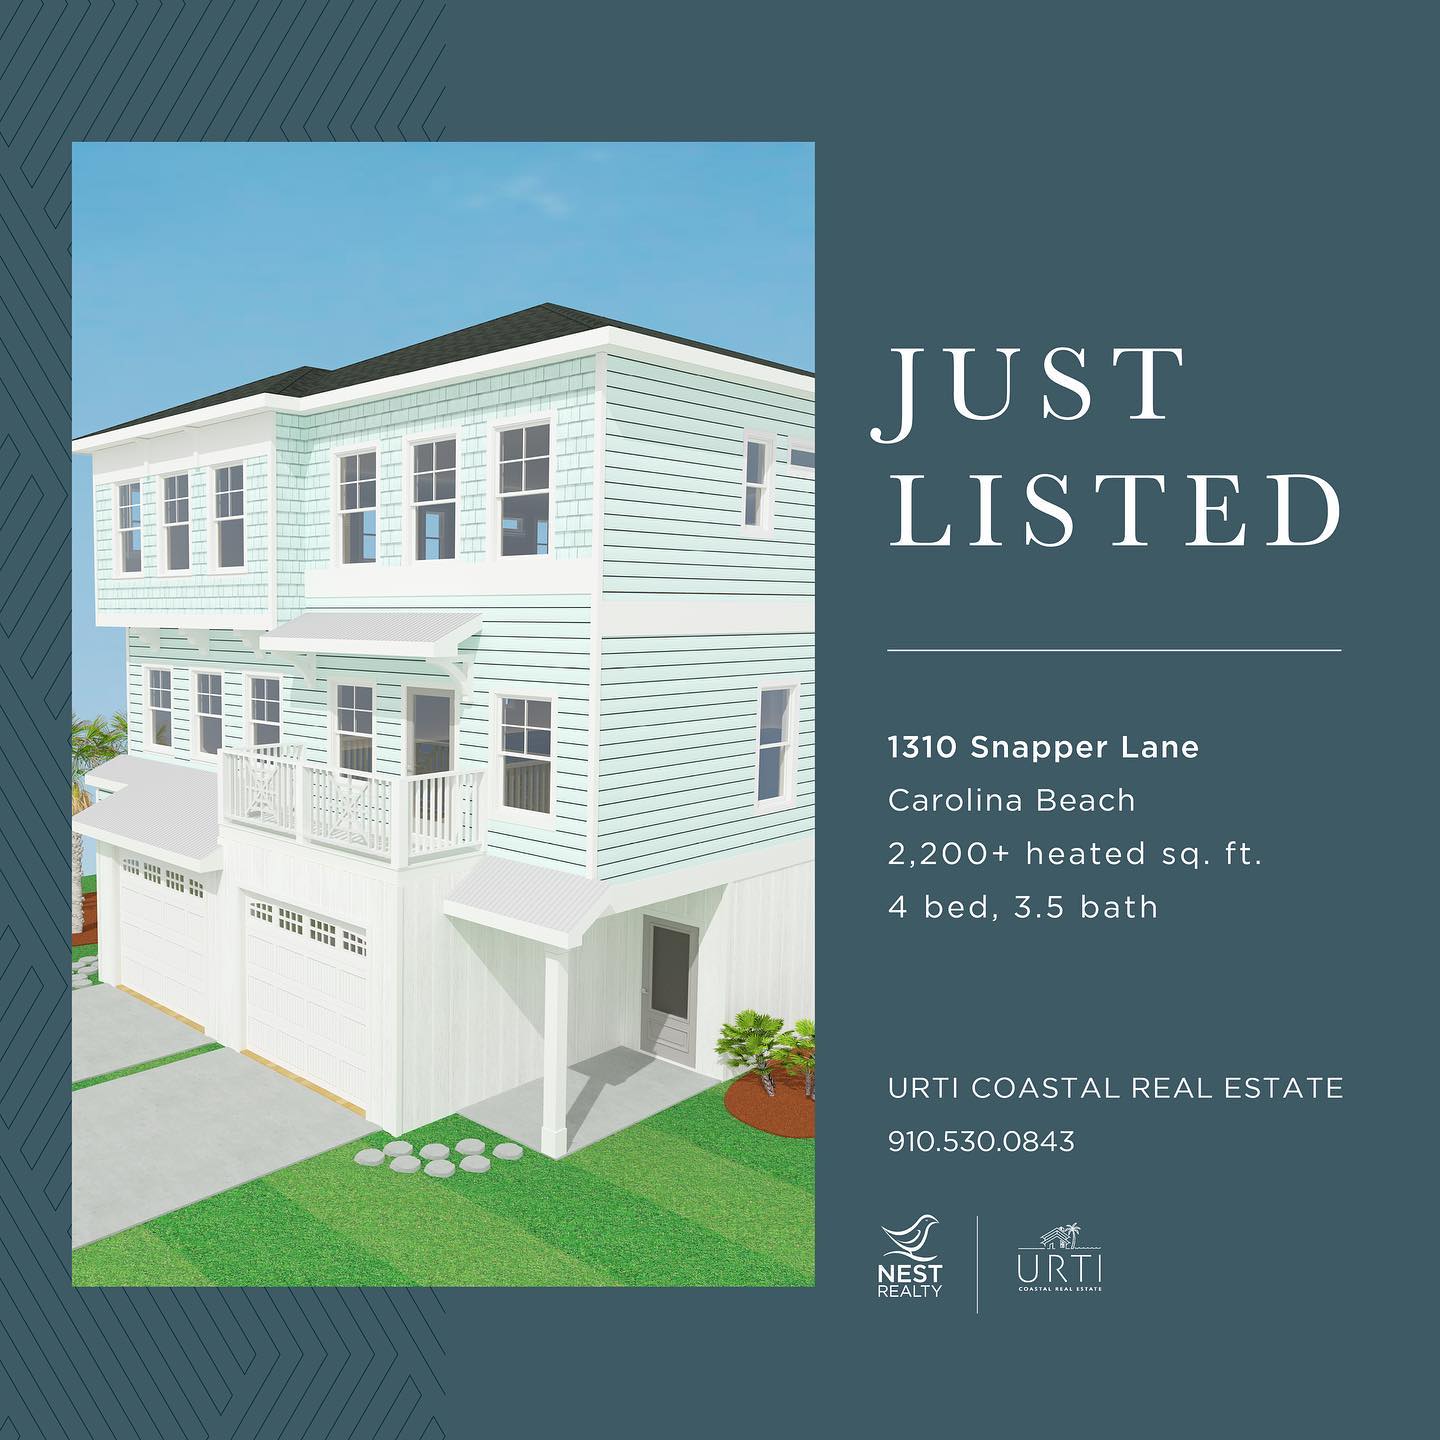 Just Listed